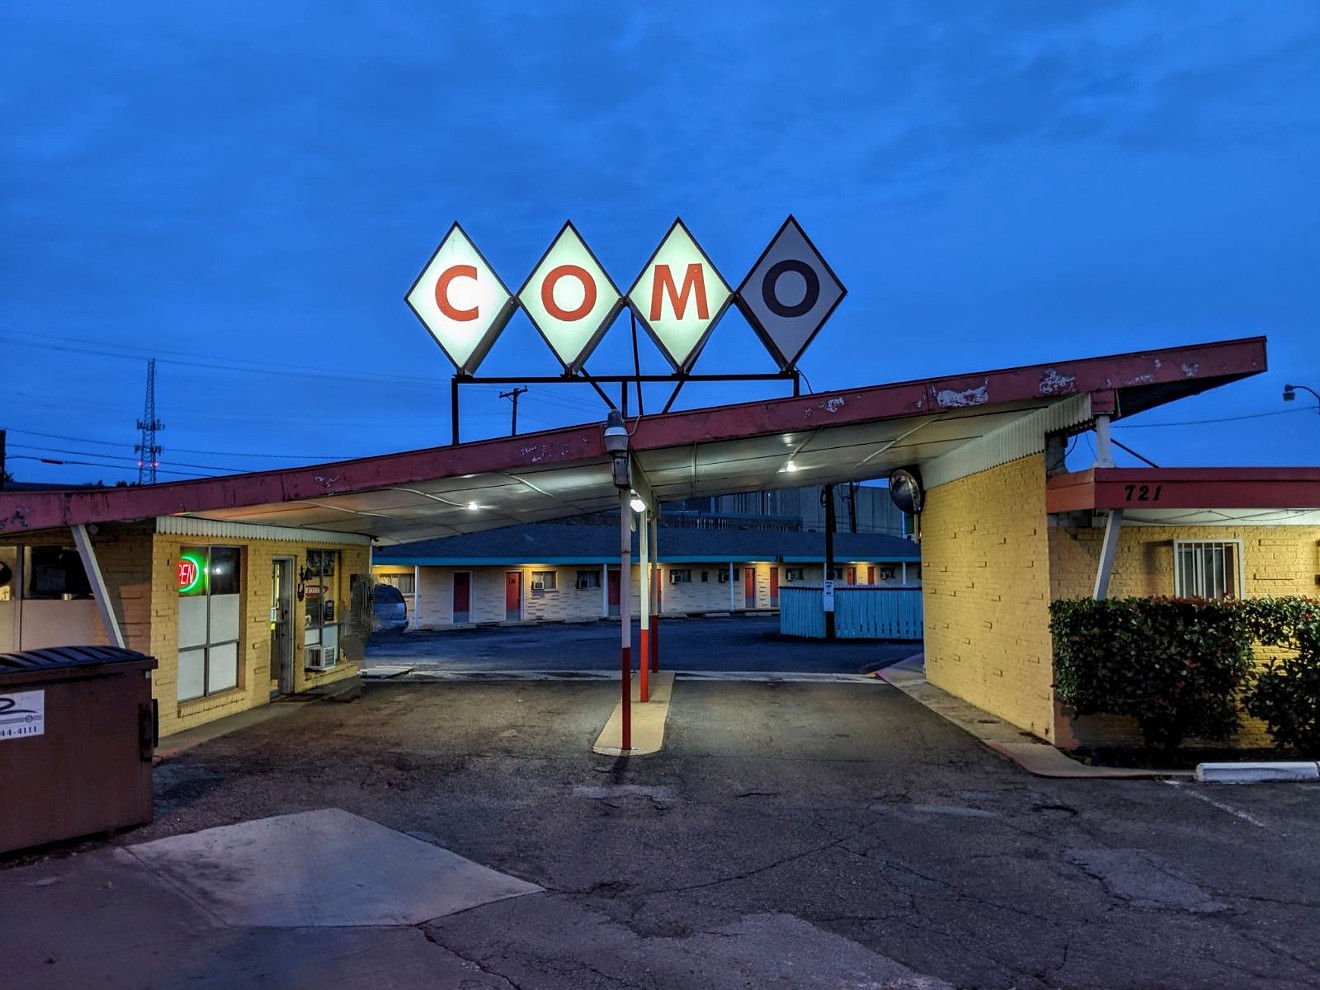 The Como Motel on North Central Expressway in Richardson is the subject of an online petition urging its new owner, Pappas Restaurants, to preserve it.